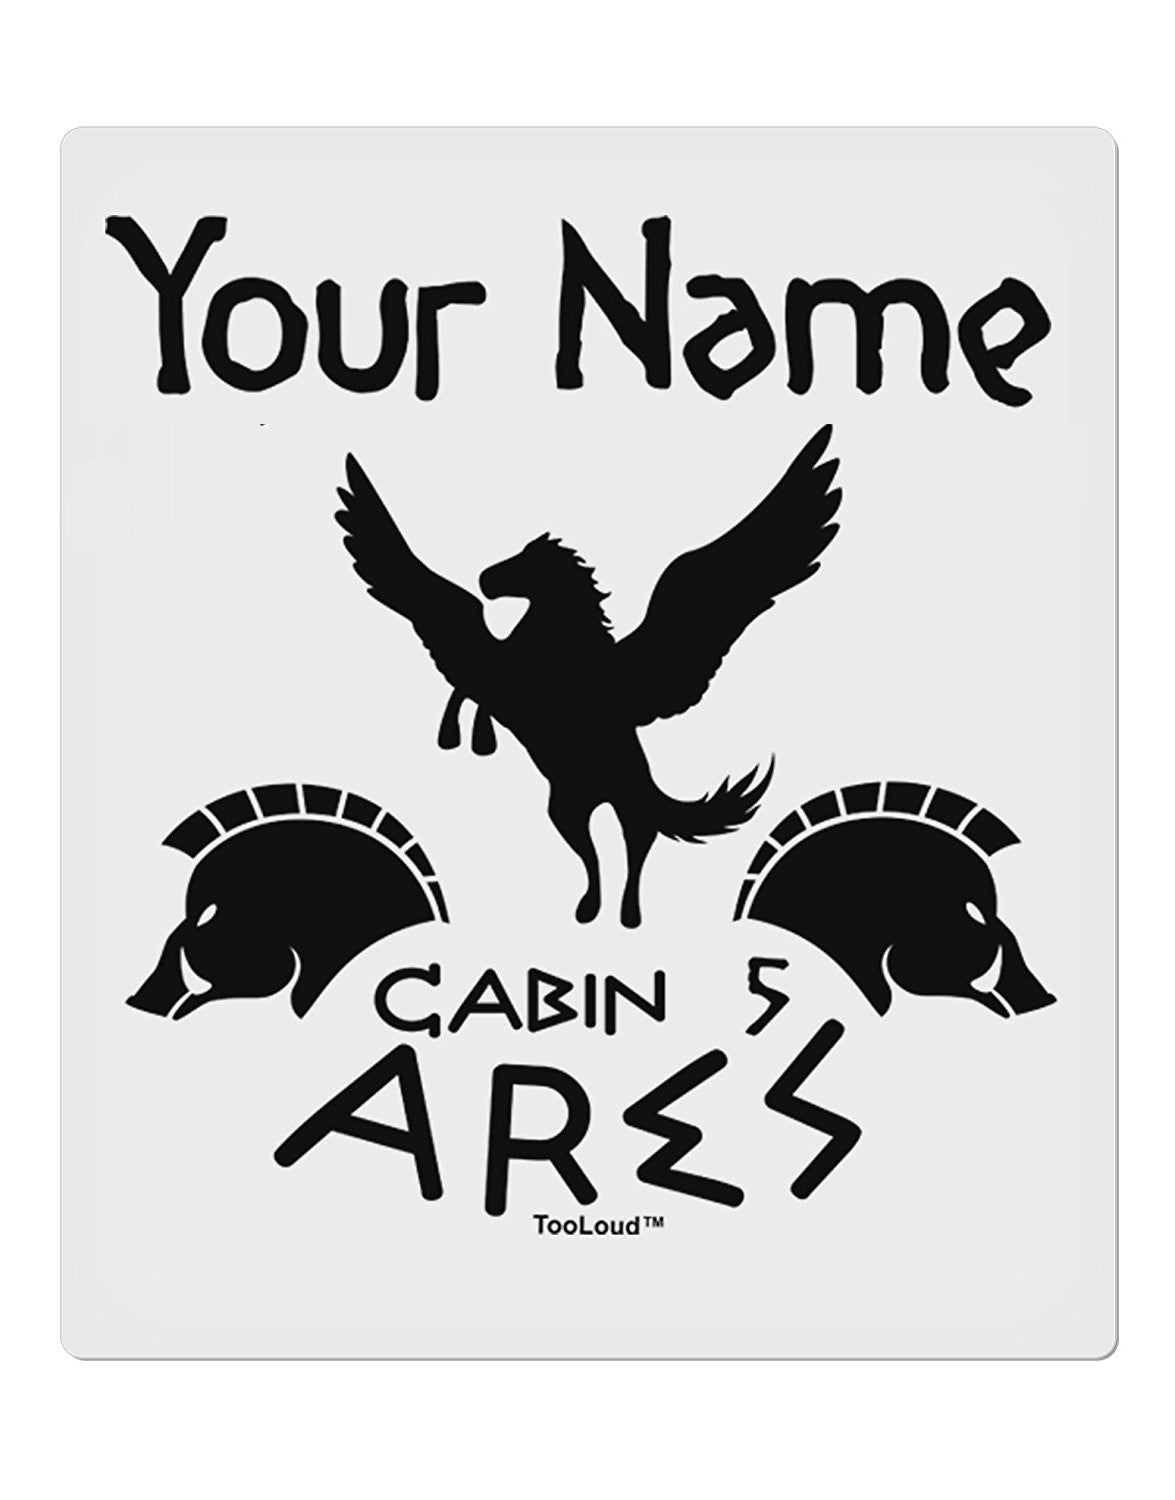 Personalized Camp Half Blood Cabin 5 Ares 9 x 10.5 Rectangular